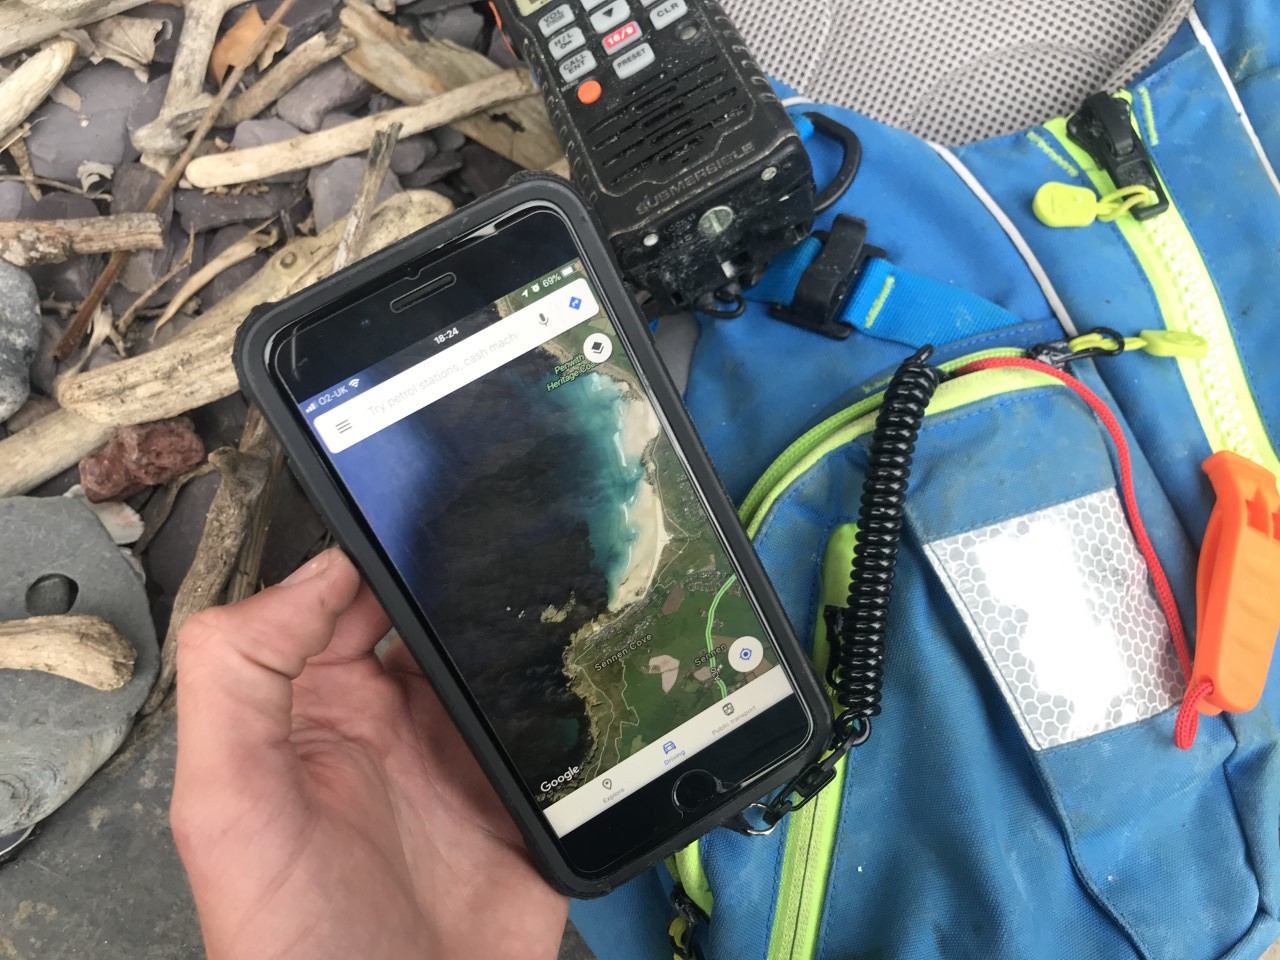 iPhone 7 Plus leashed to the Palm Kaikoura PFD